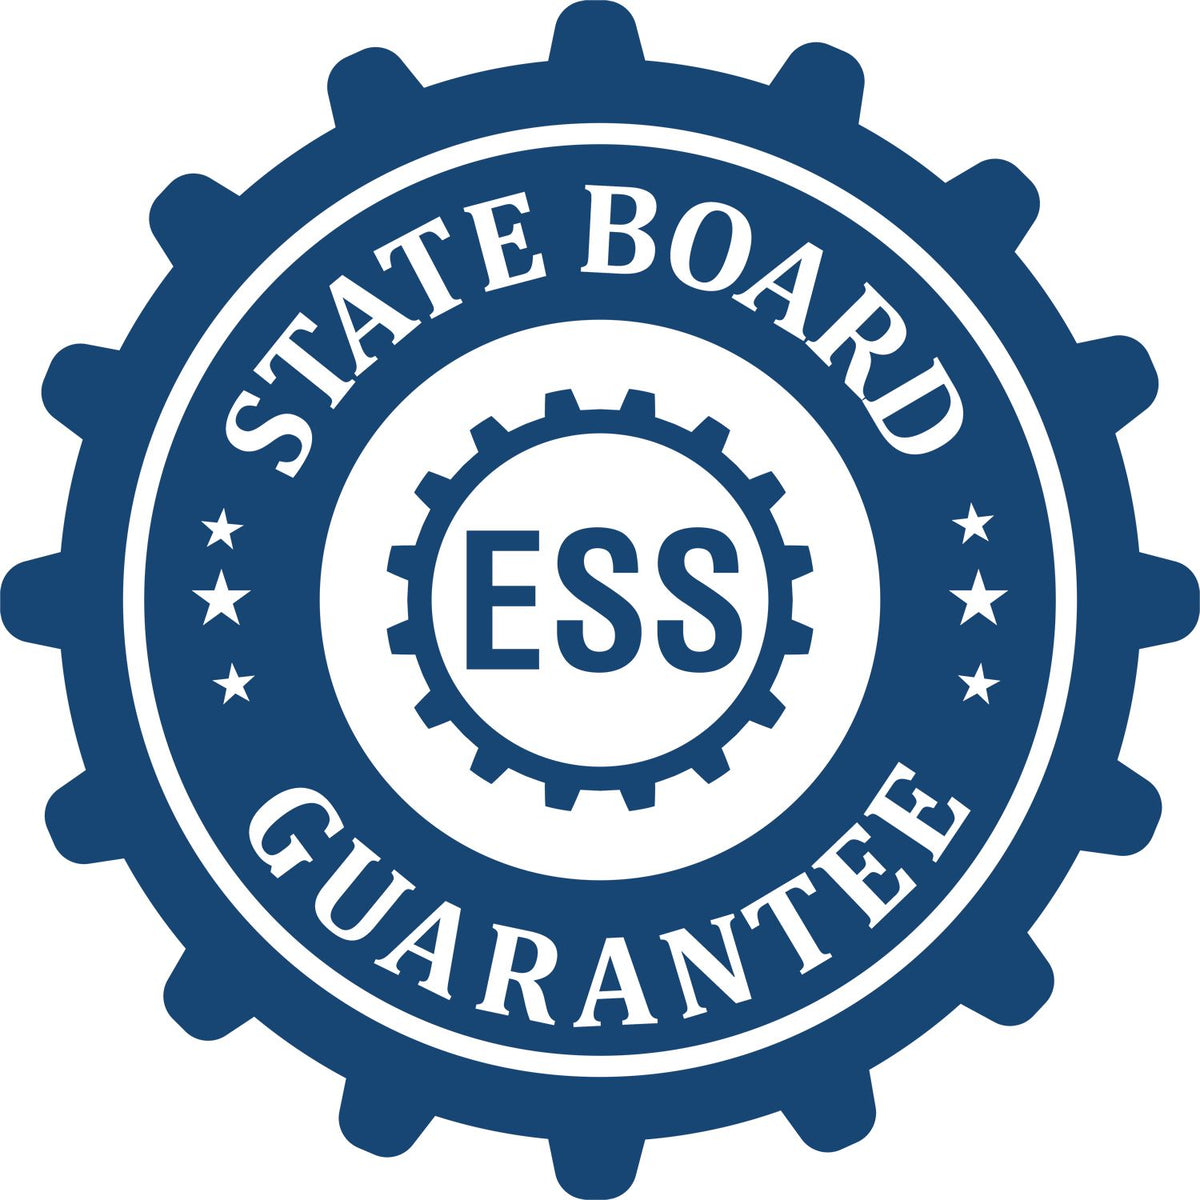 An emblem in a gear shape illustrating a state board guarantee for the New York Desk Architect Embossing Seal product.